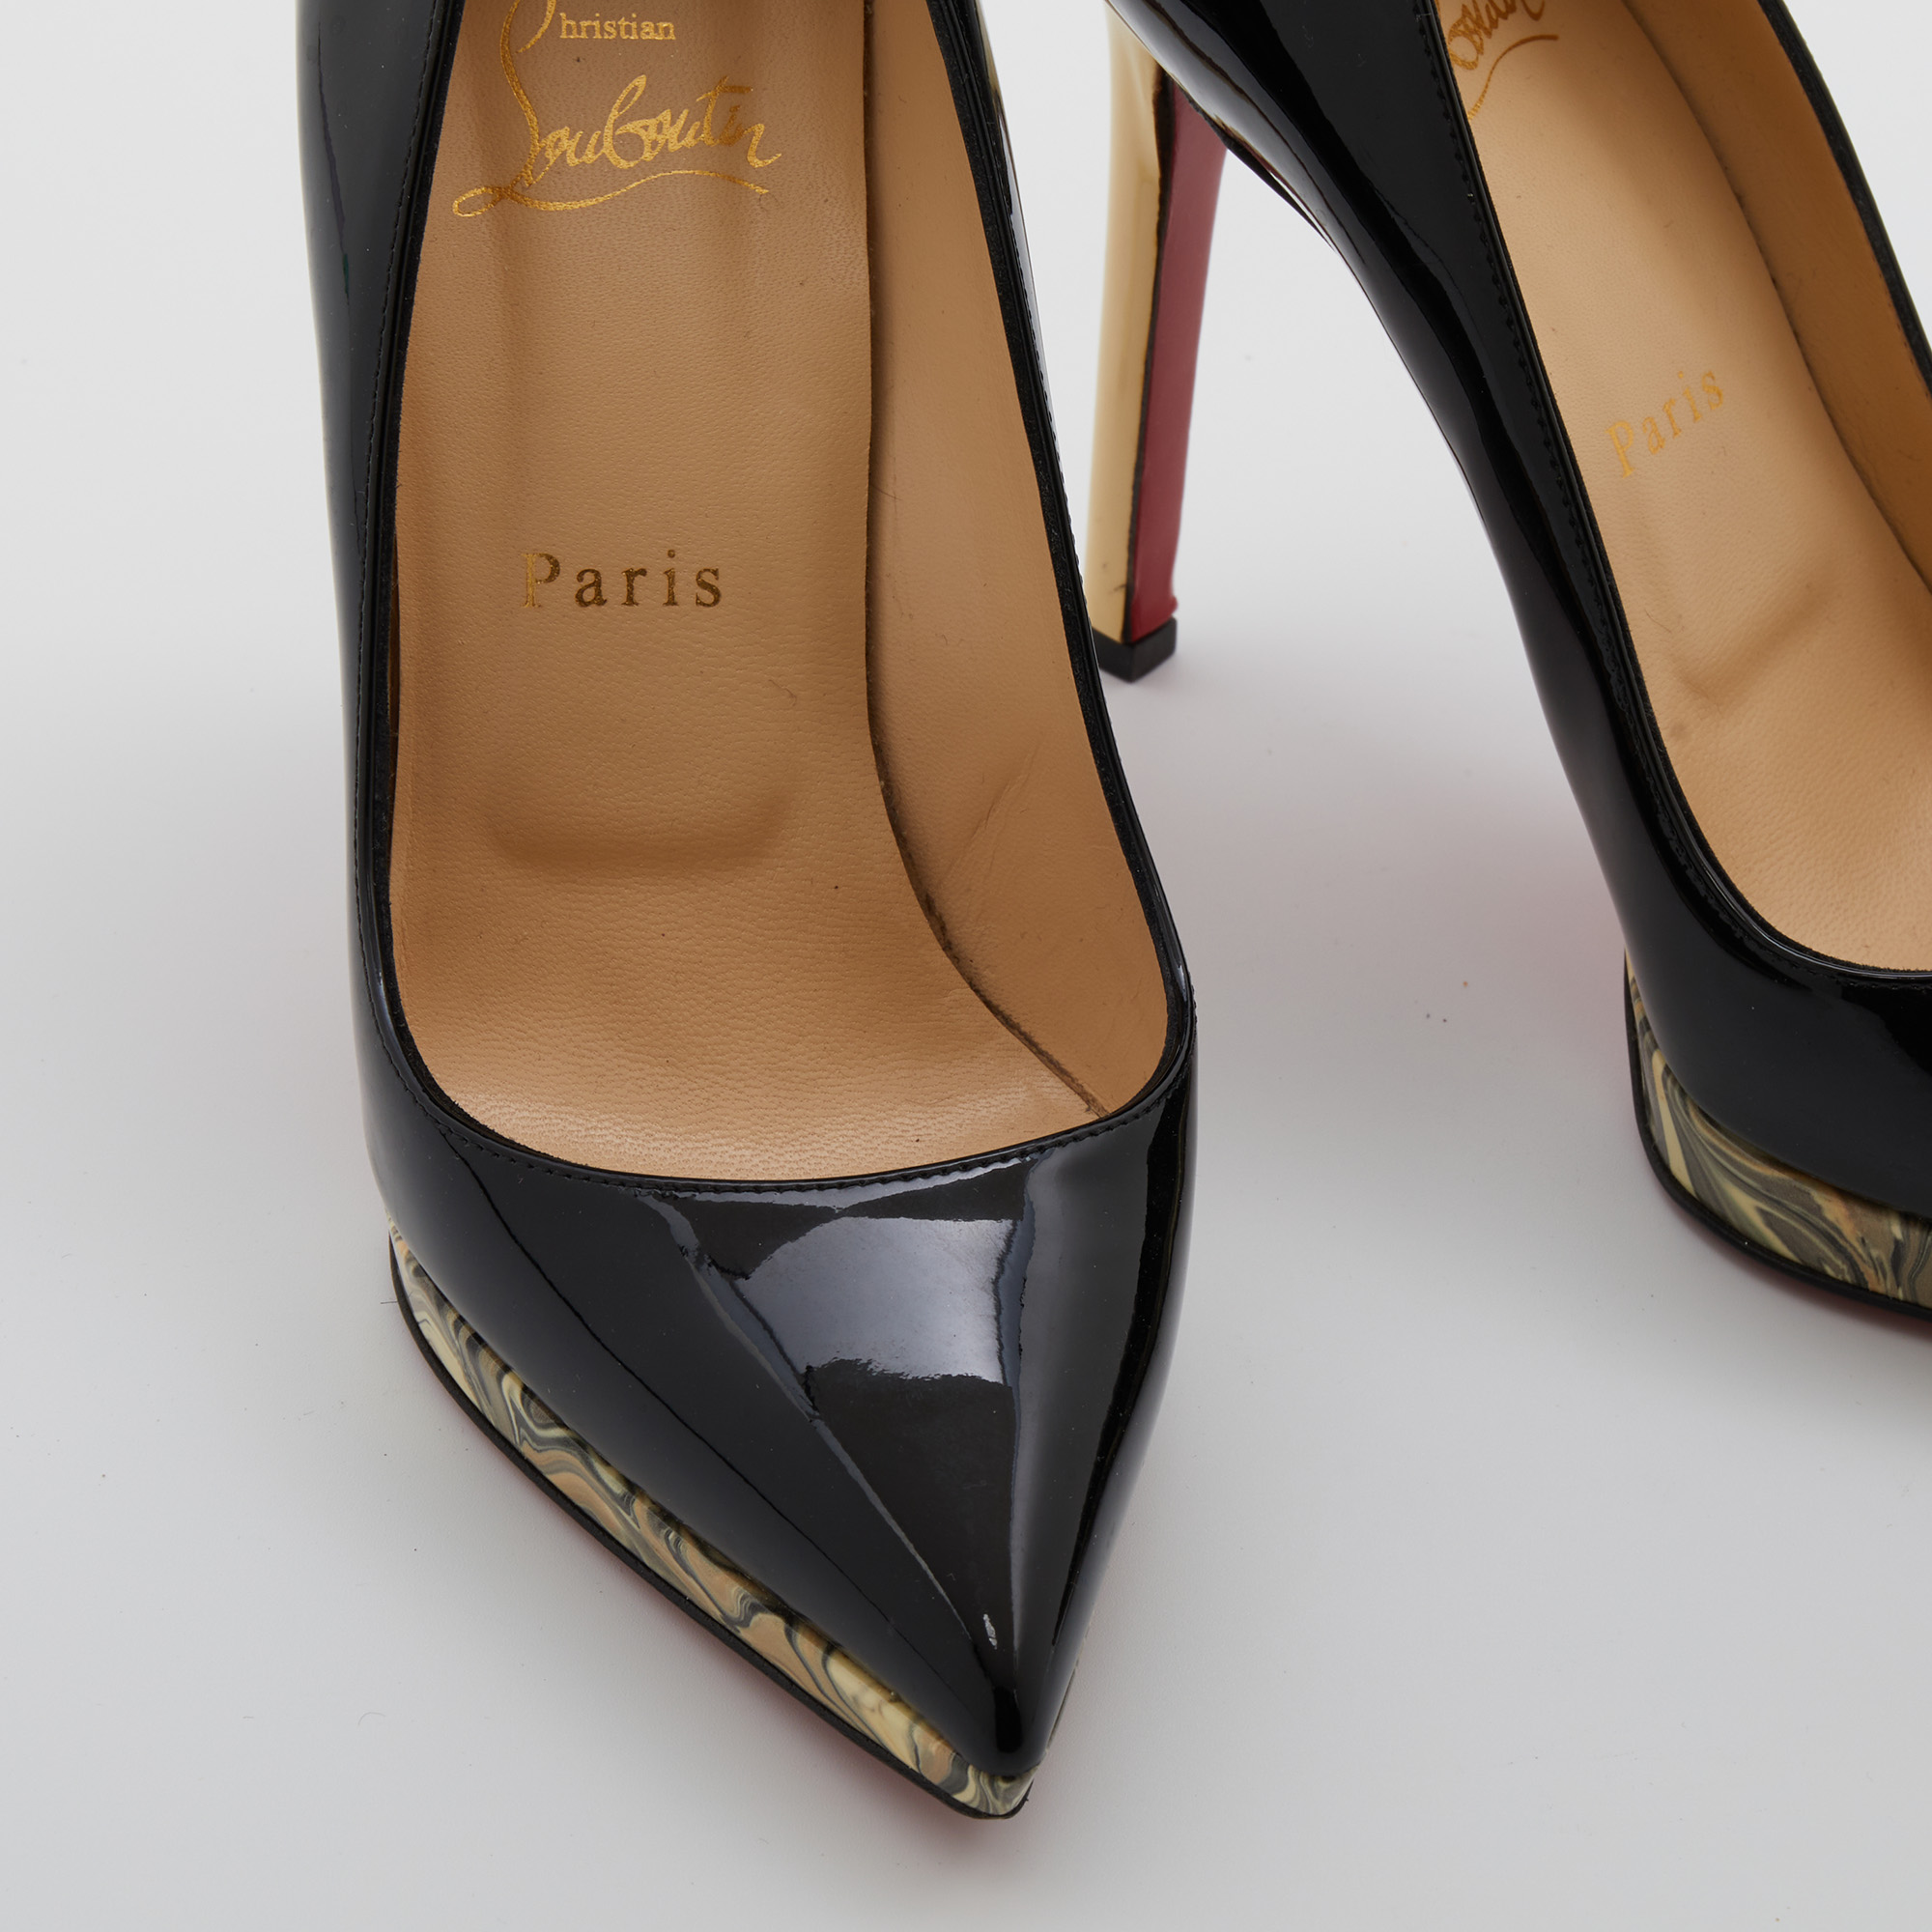 Christian Louboutin Black Patent Leather Pointed Toe Pumps Size 36